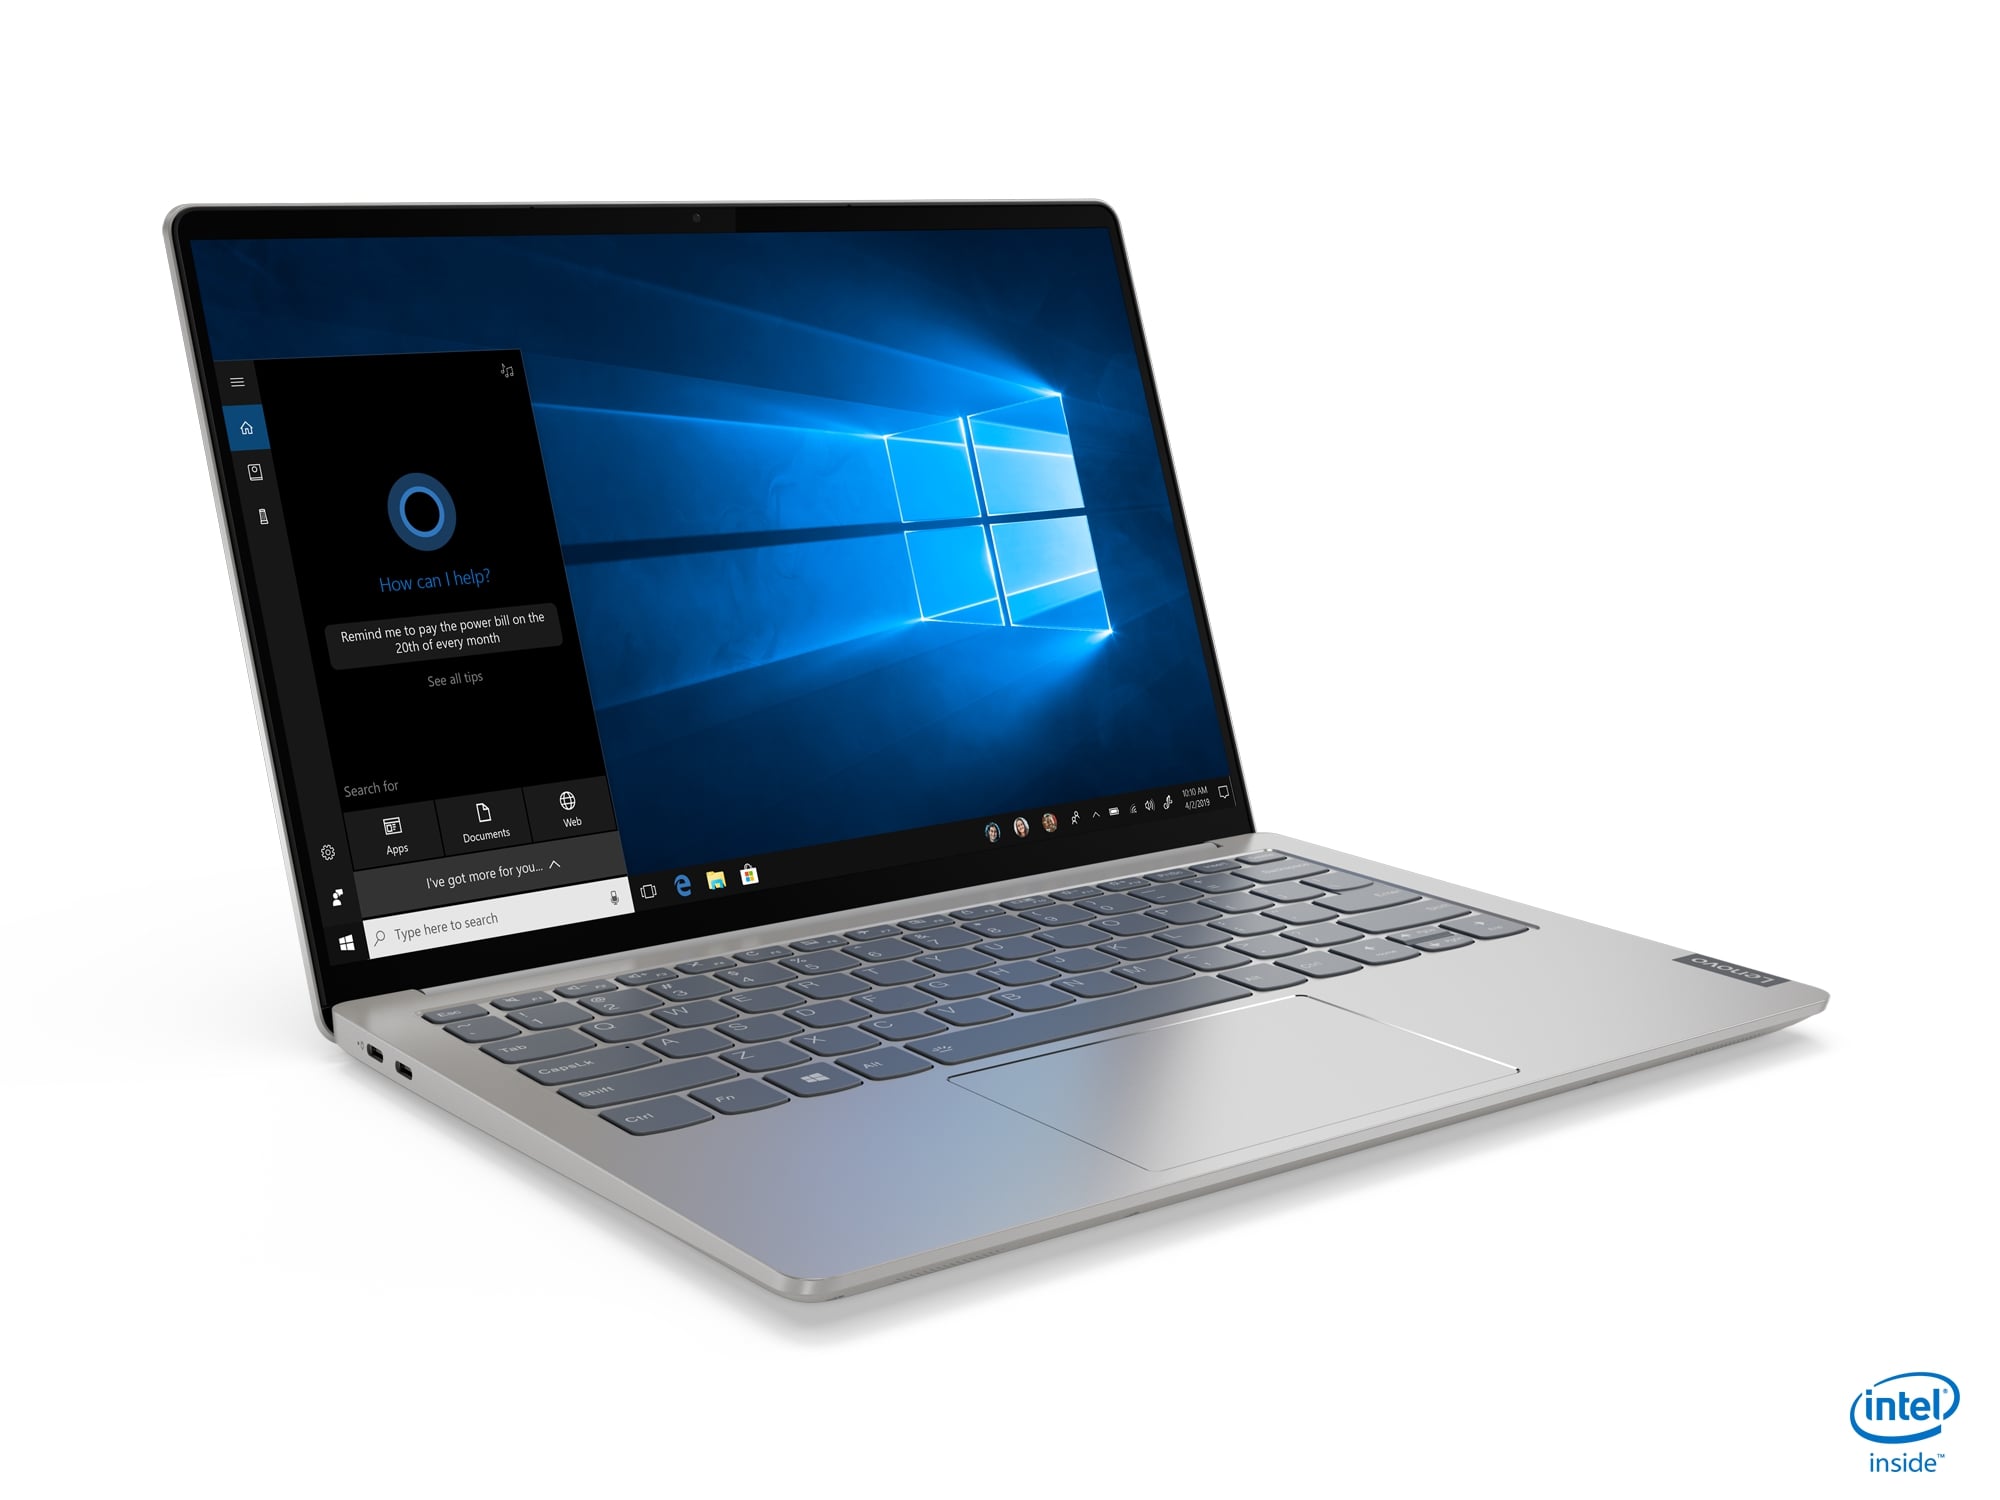 lenovo takes on xps 13 with ideapad s540 13inch right intel silver